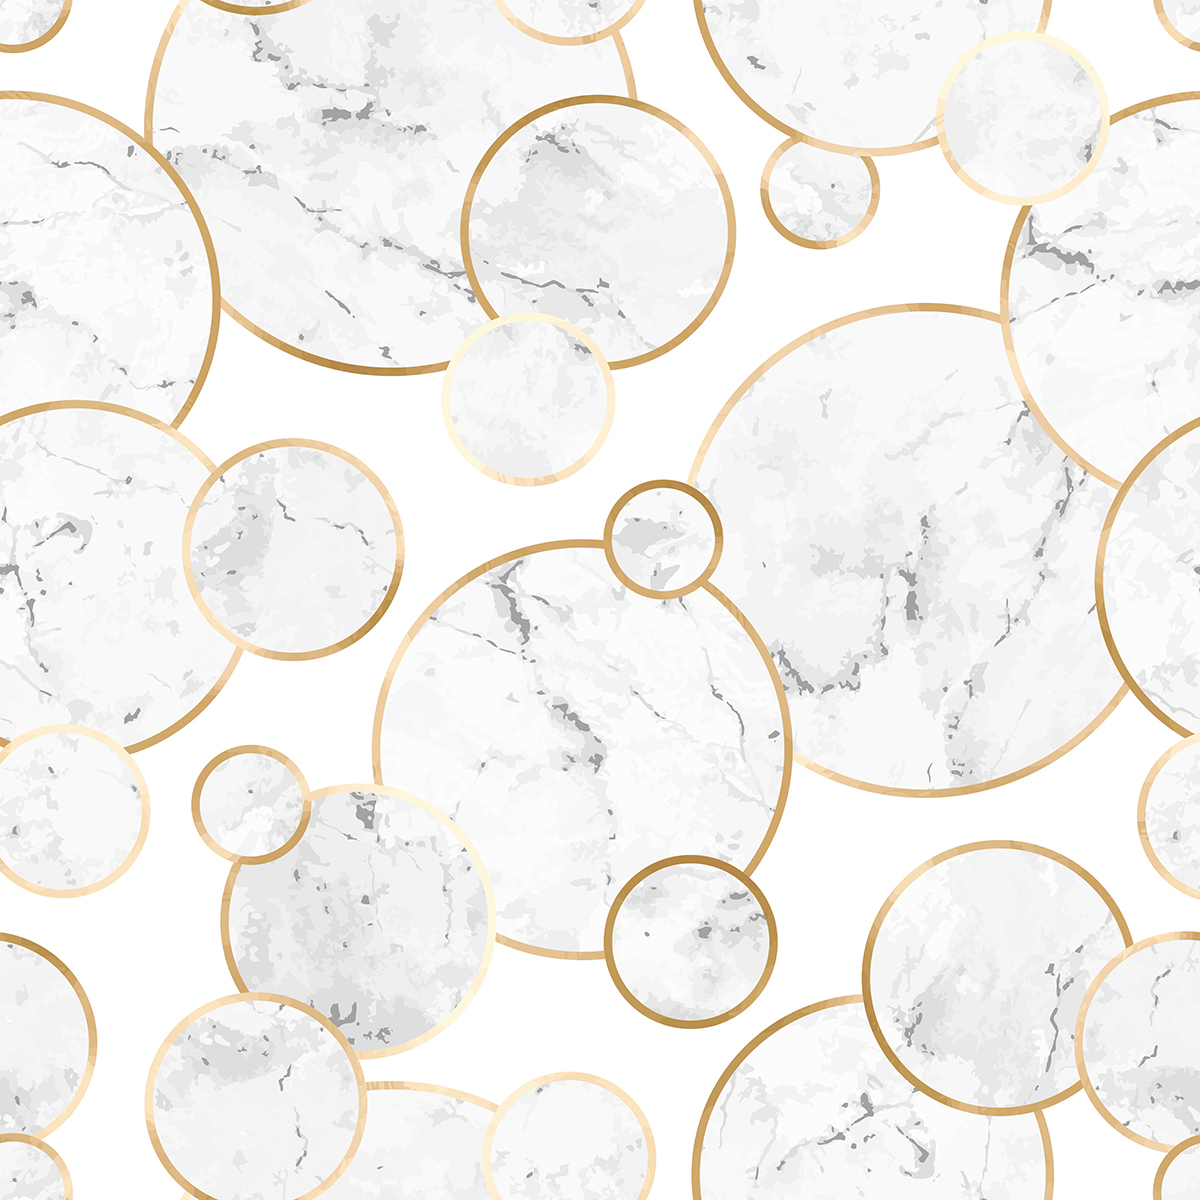 A pattern of white and gold circles